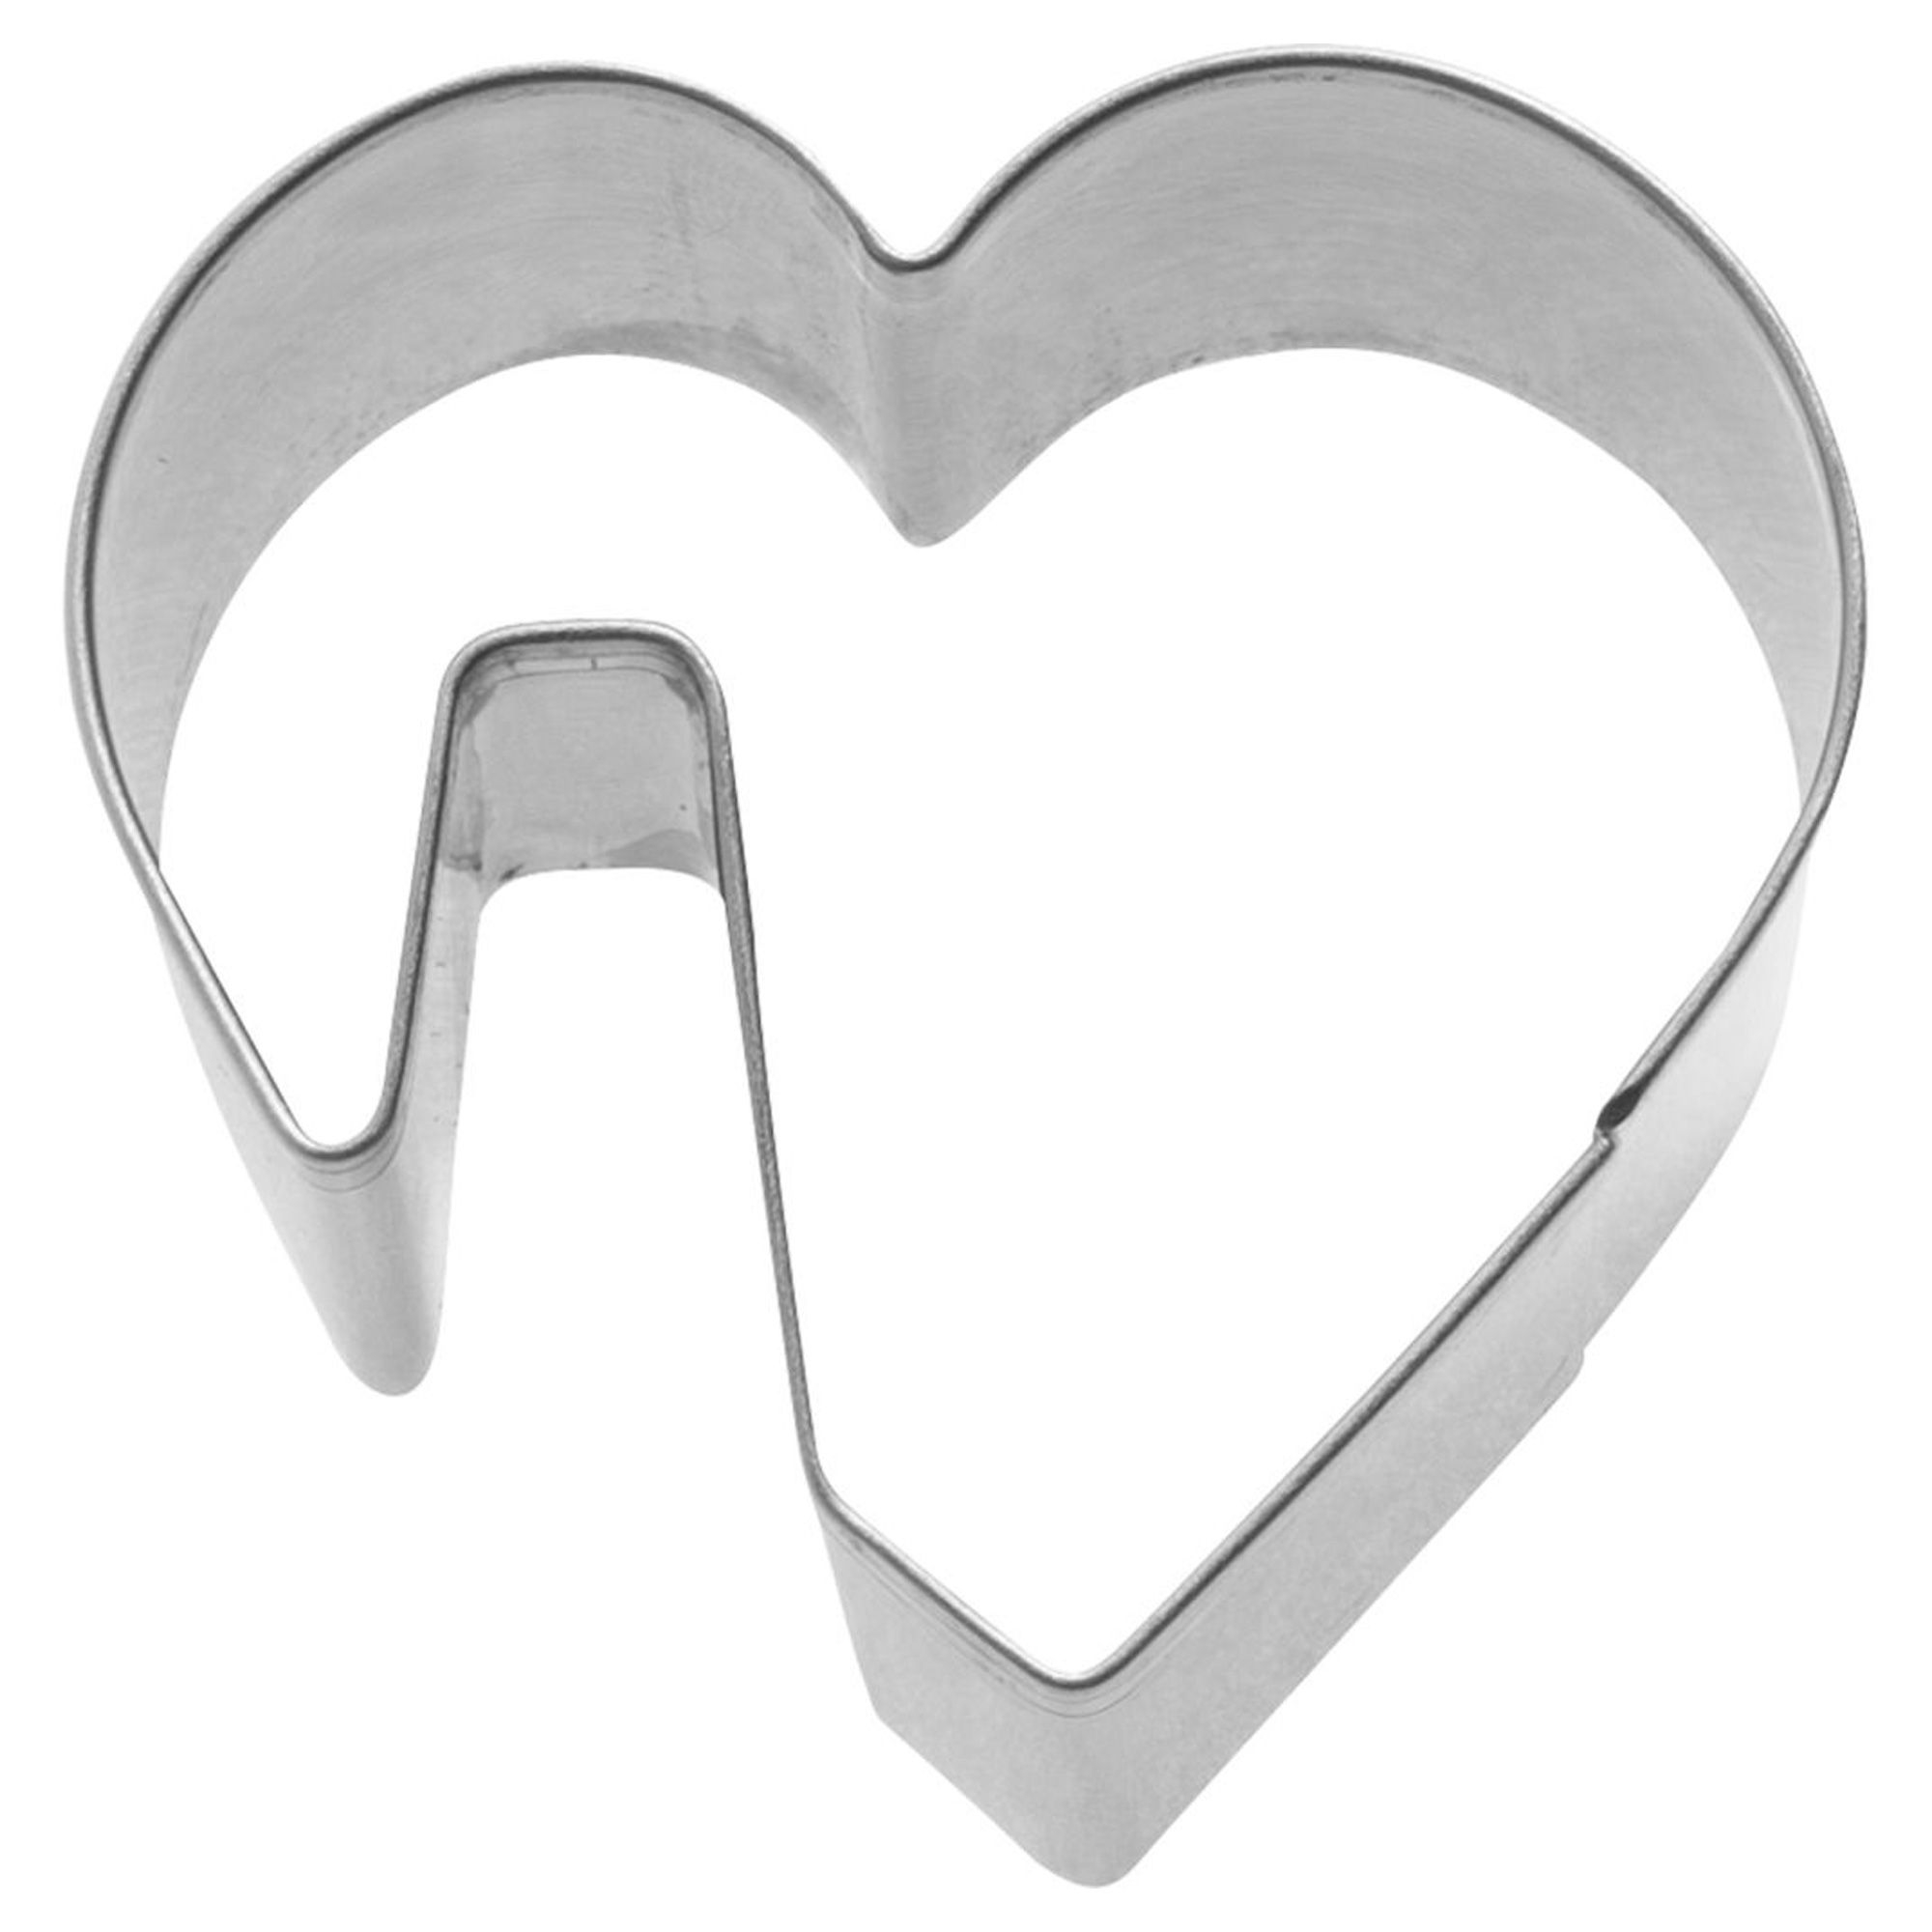 Westmark - Cup biscuit cutter "Heart", 5 cm, loose with EAN